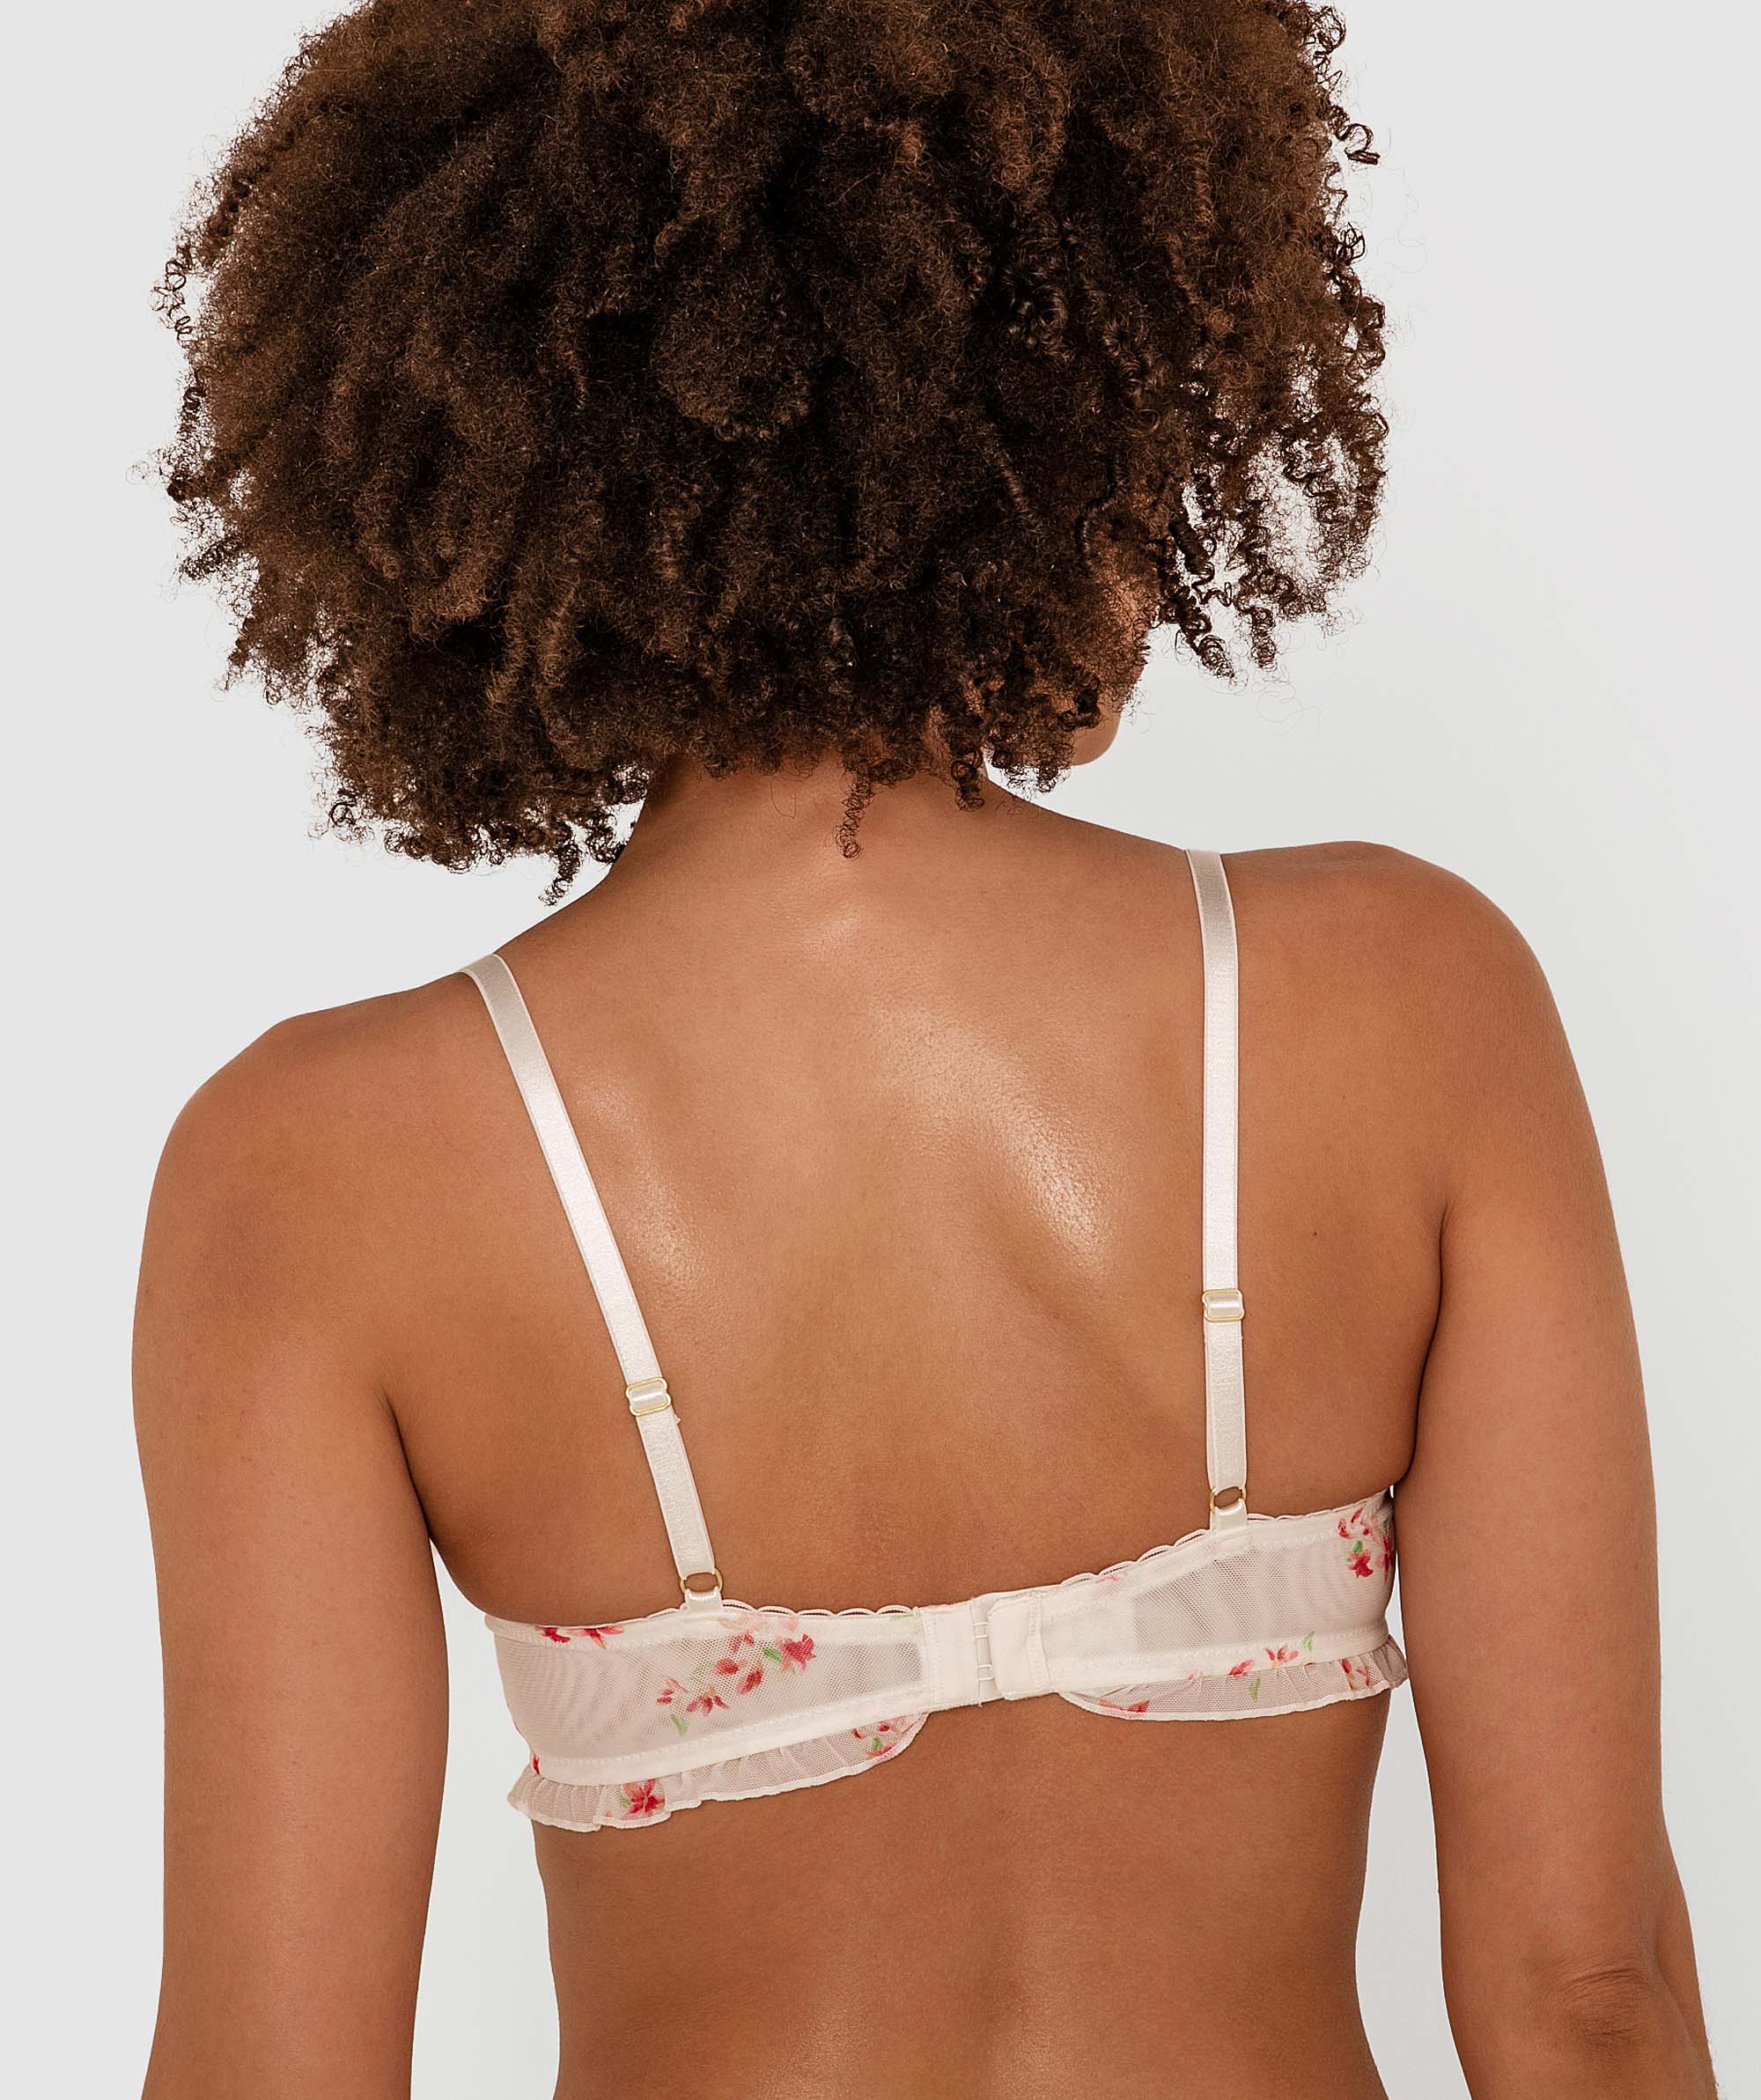 Canna Lily Underwire Bra - Floral Print